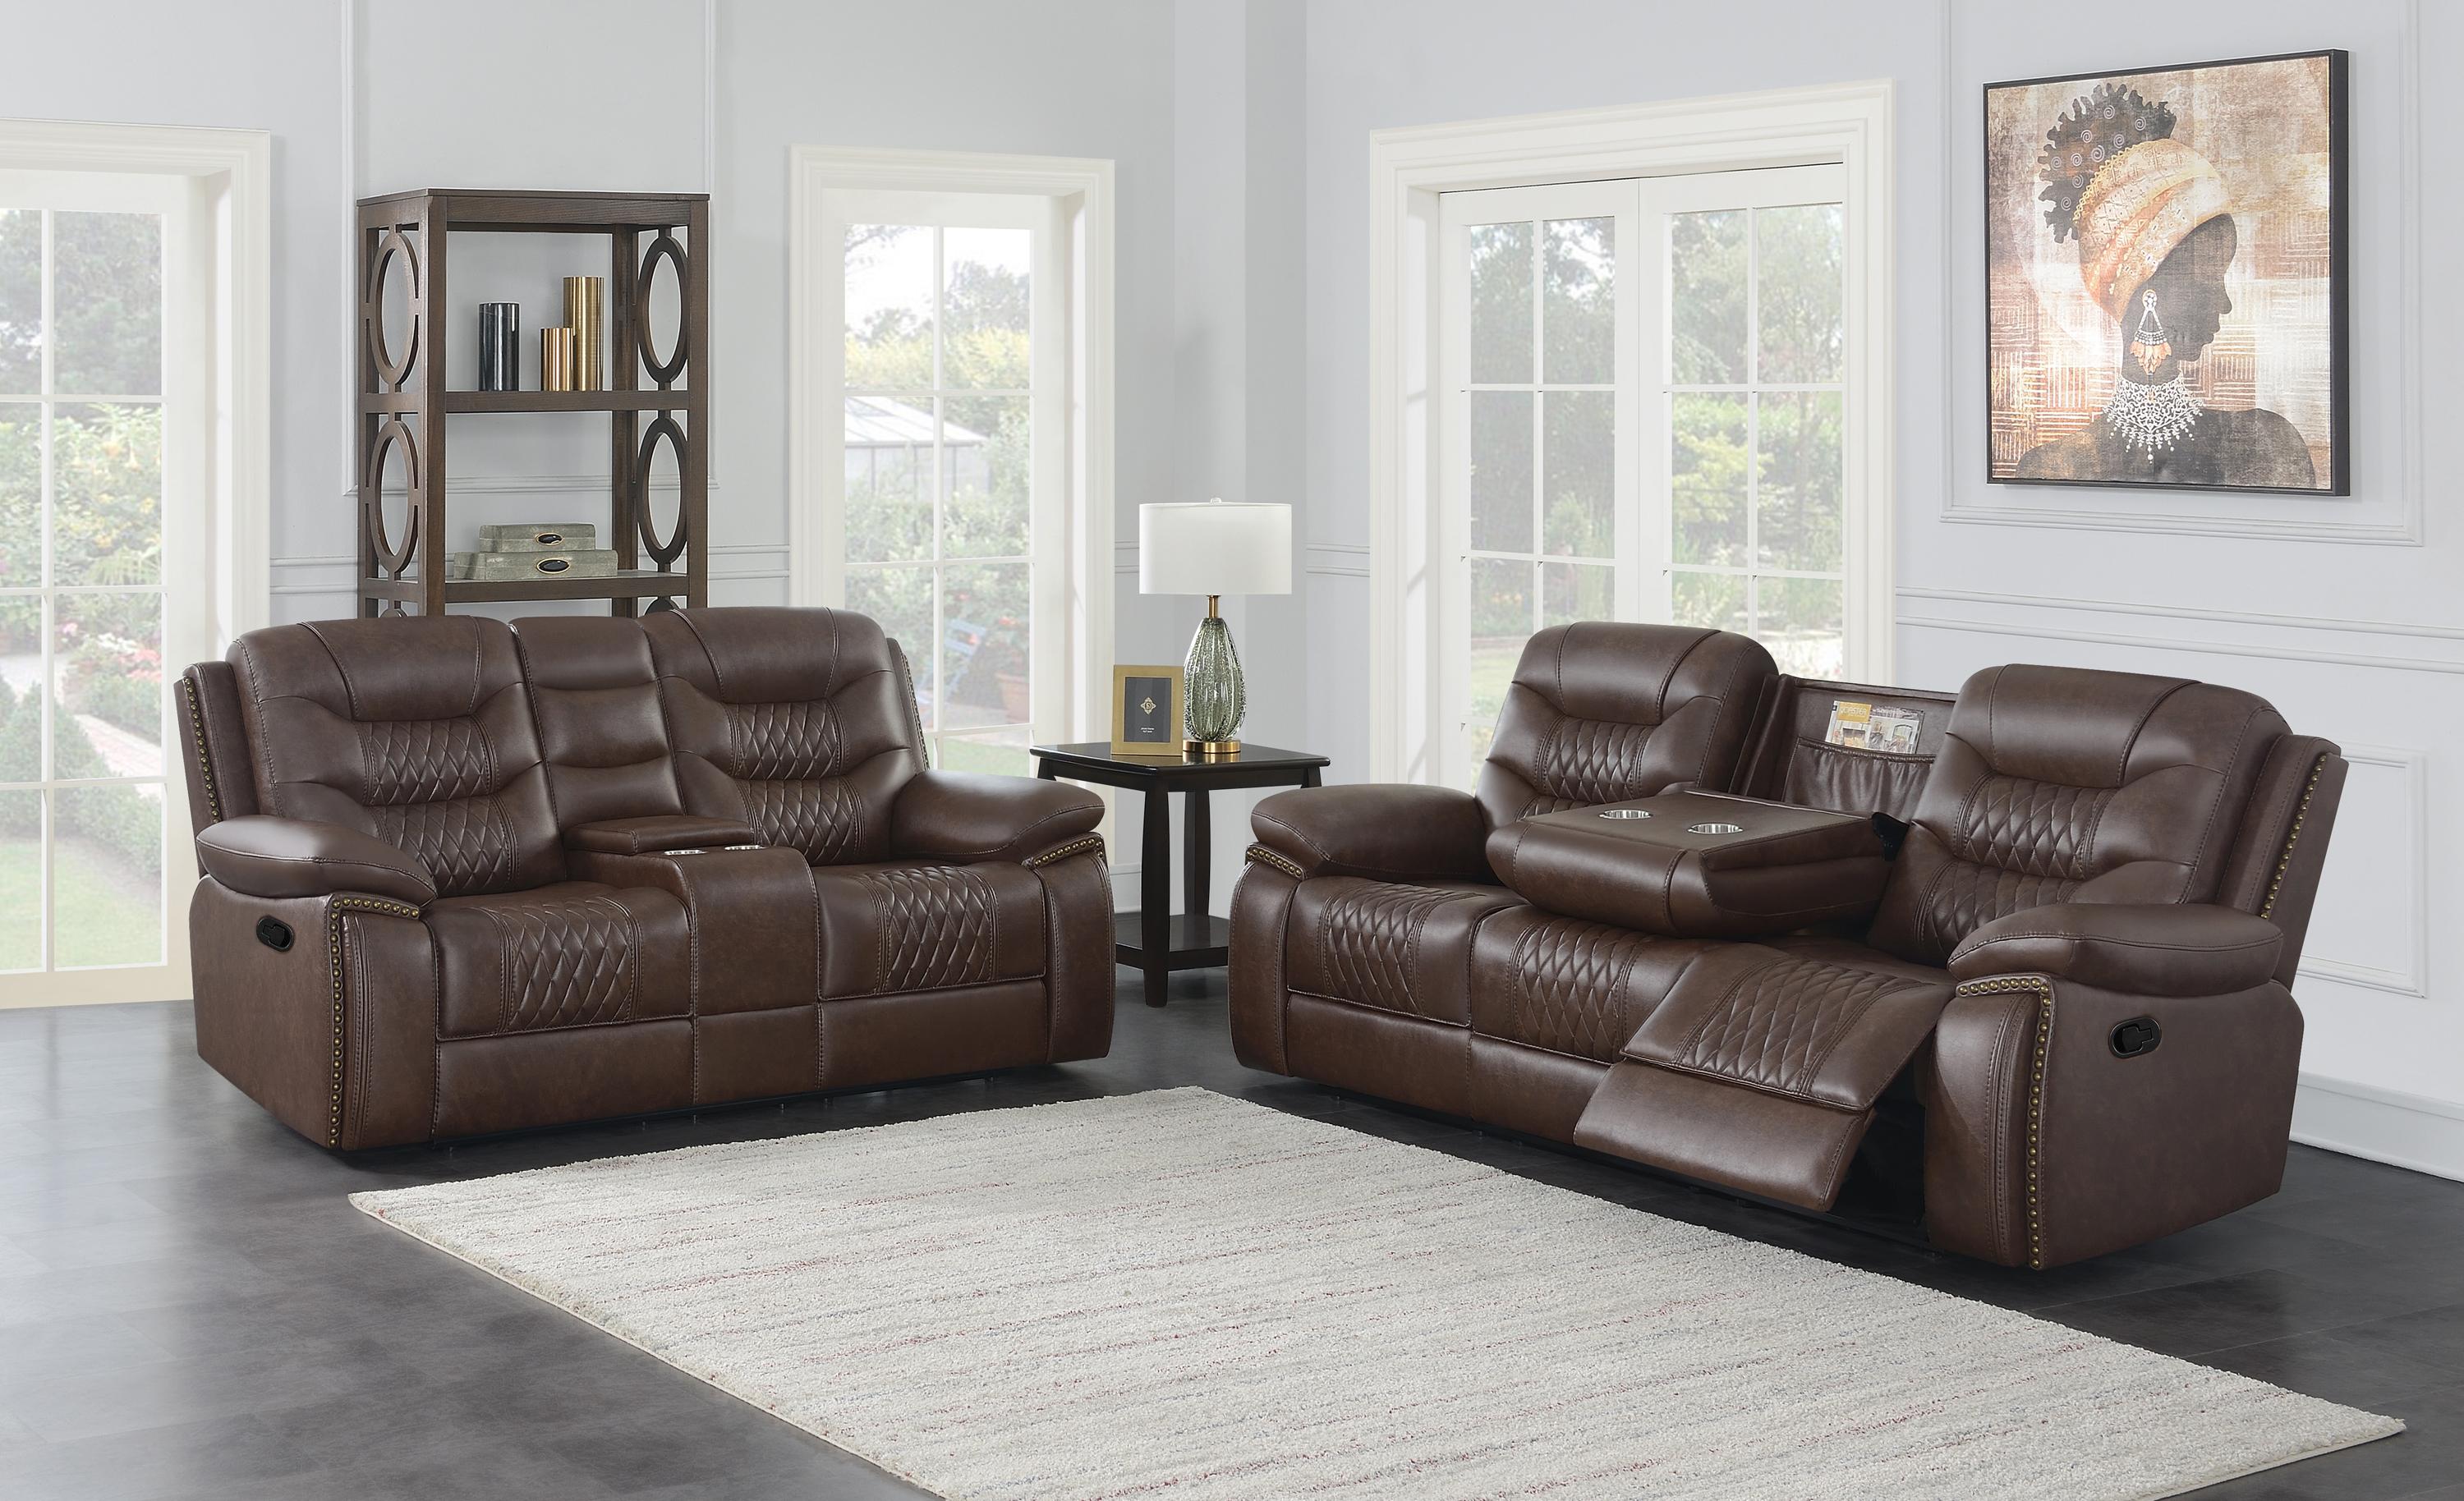 Modern Motion Sofa Set 610201-S2 Flamenco 610201-S2 in Brown Leatherette